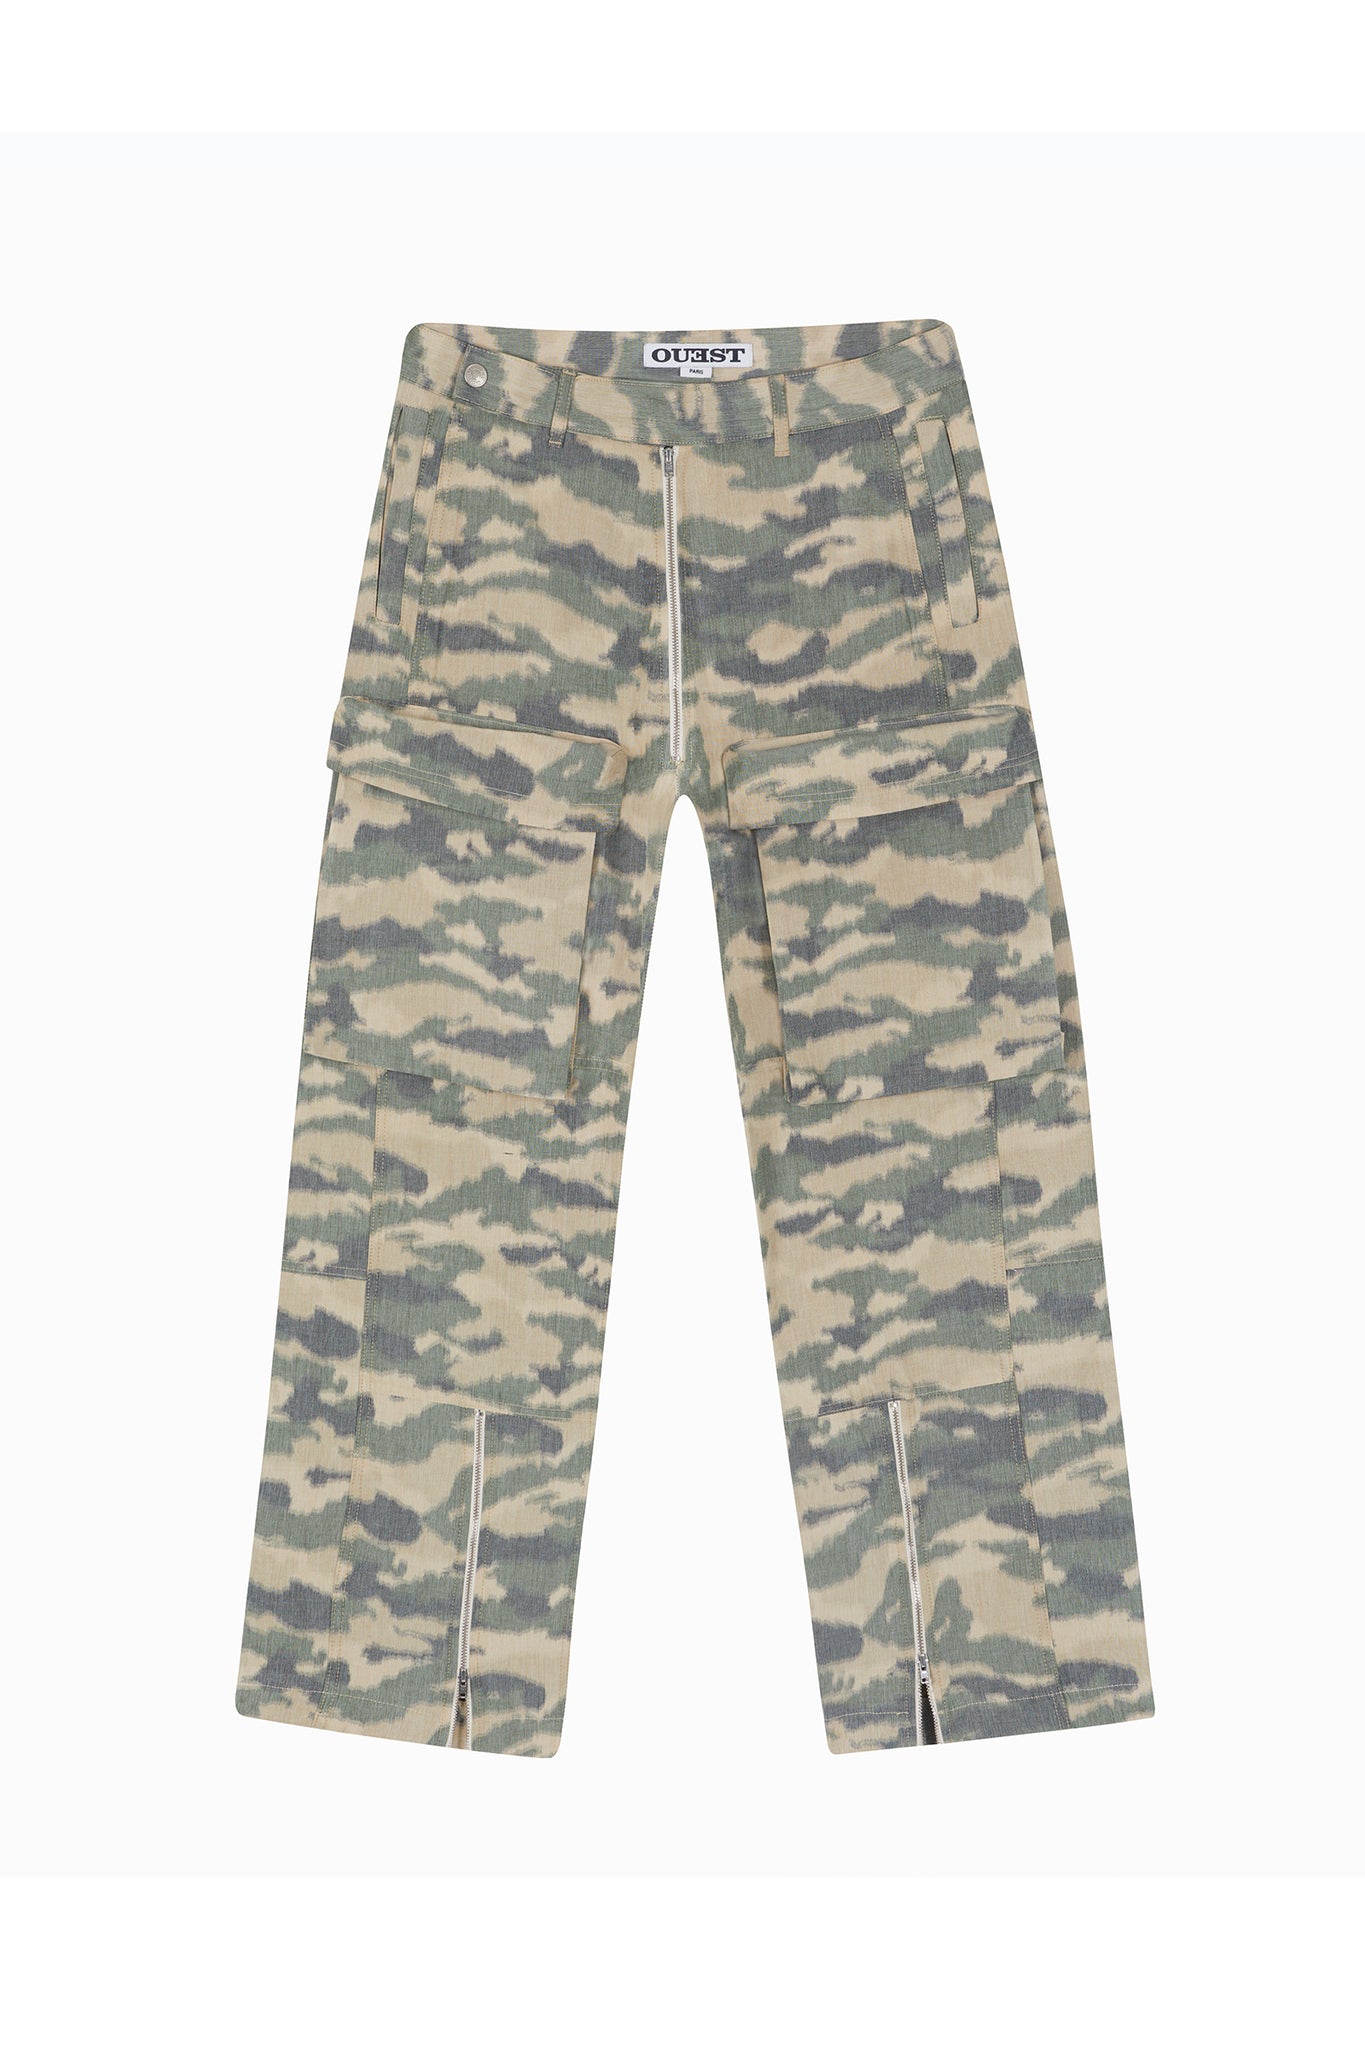 THE ASTRO PANTS IN CAMOUFLAGE COTTON